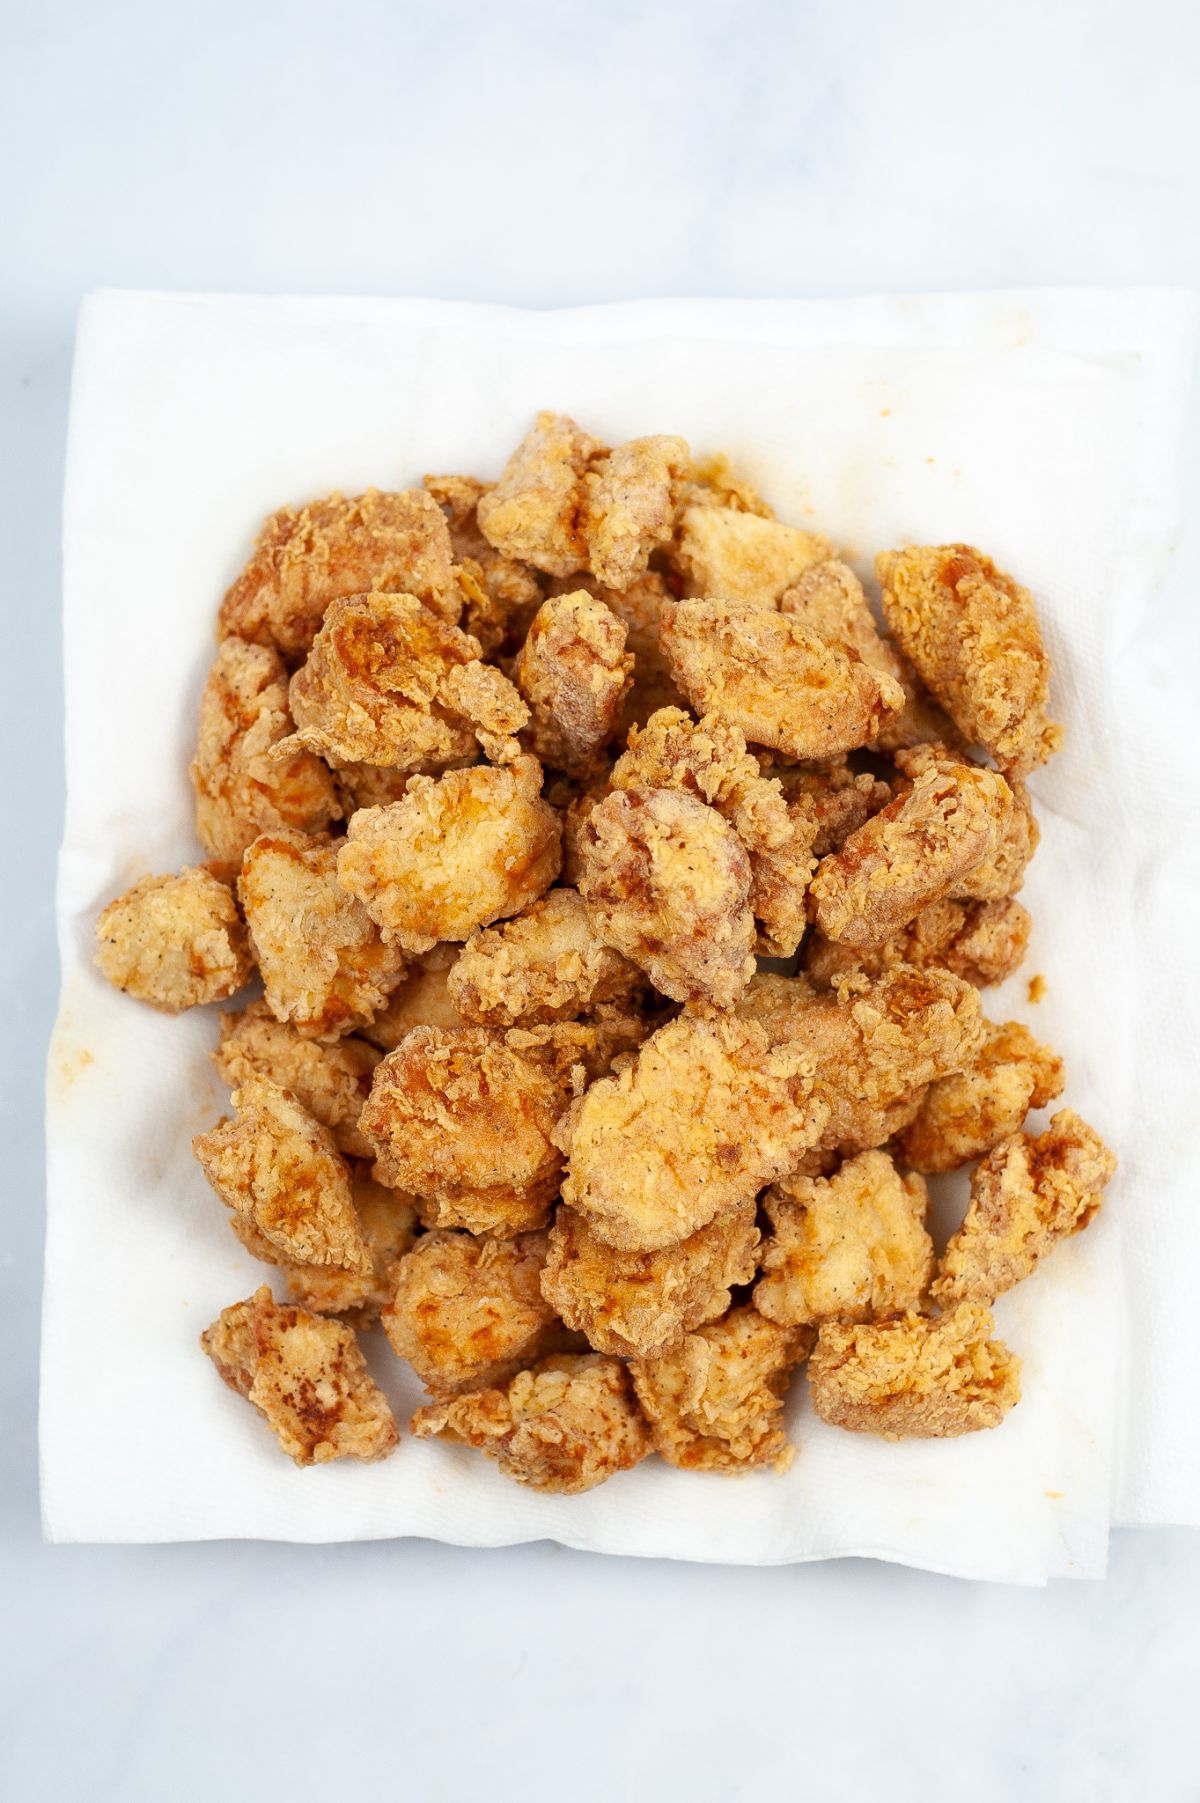 fried chicken pieces on a paper towel